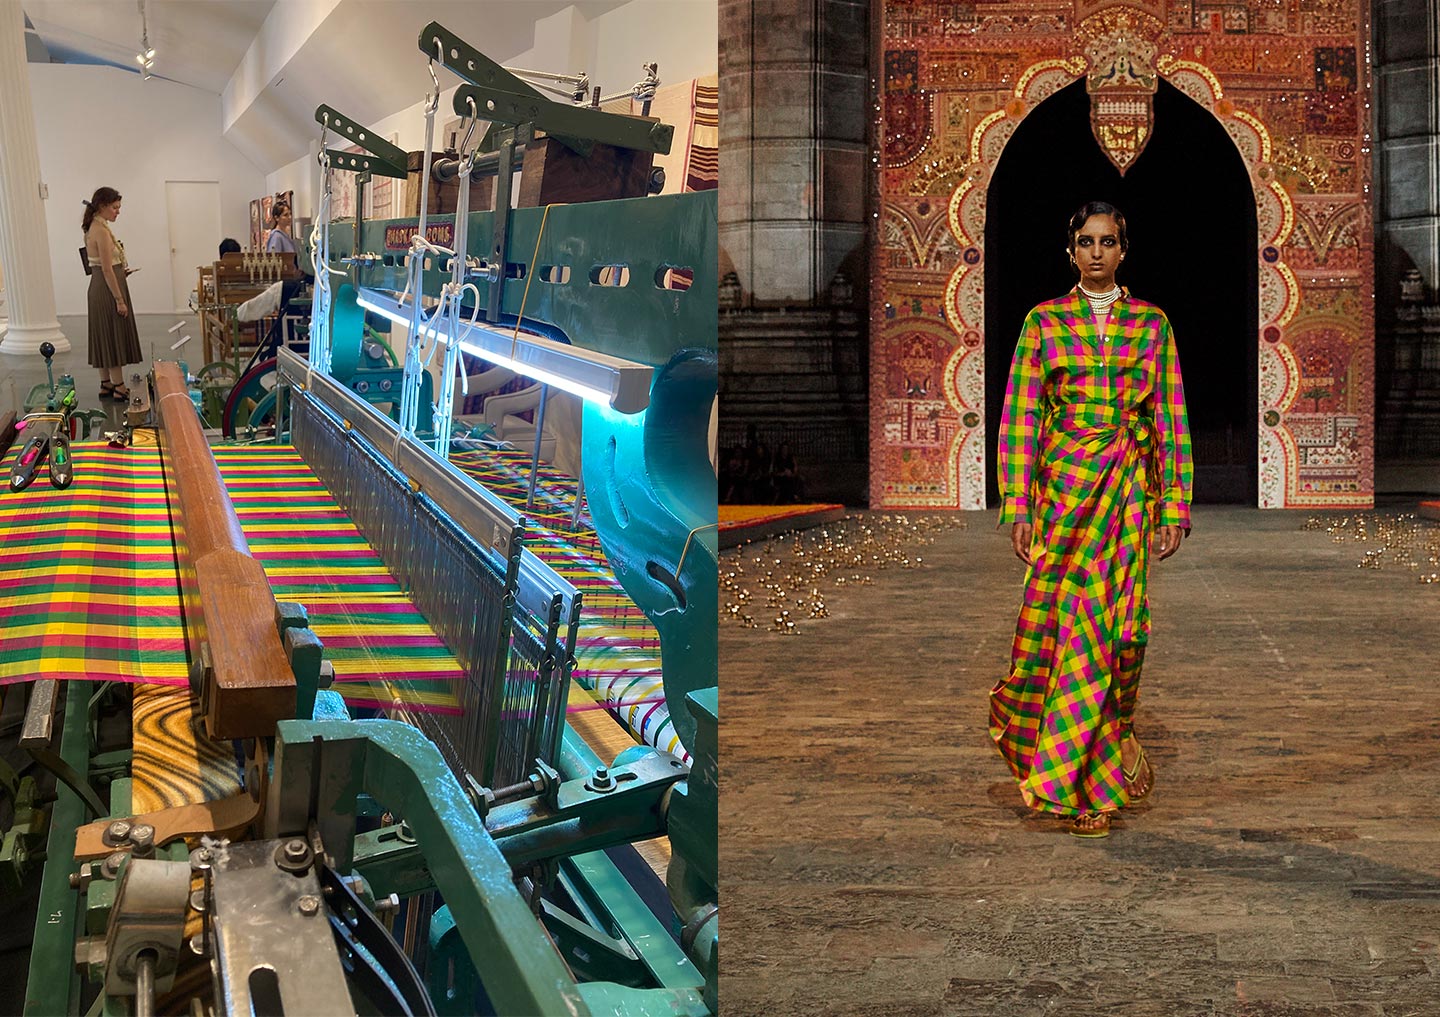 On the left, a creation by the master artisans from the Chanakya Atelier © Mevin Murden; on the right, a look from Maria Grazia Chiuri's Dior Fall 23 show held at the Gateway of India in Mumbai © Dior